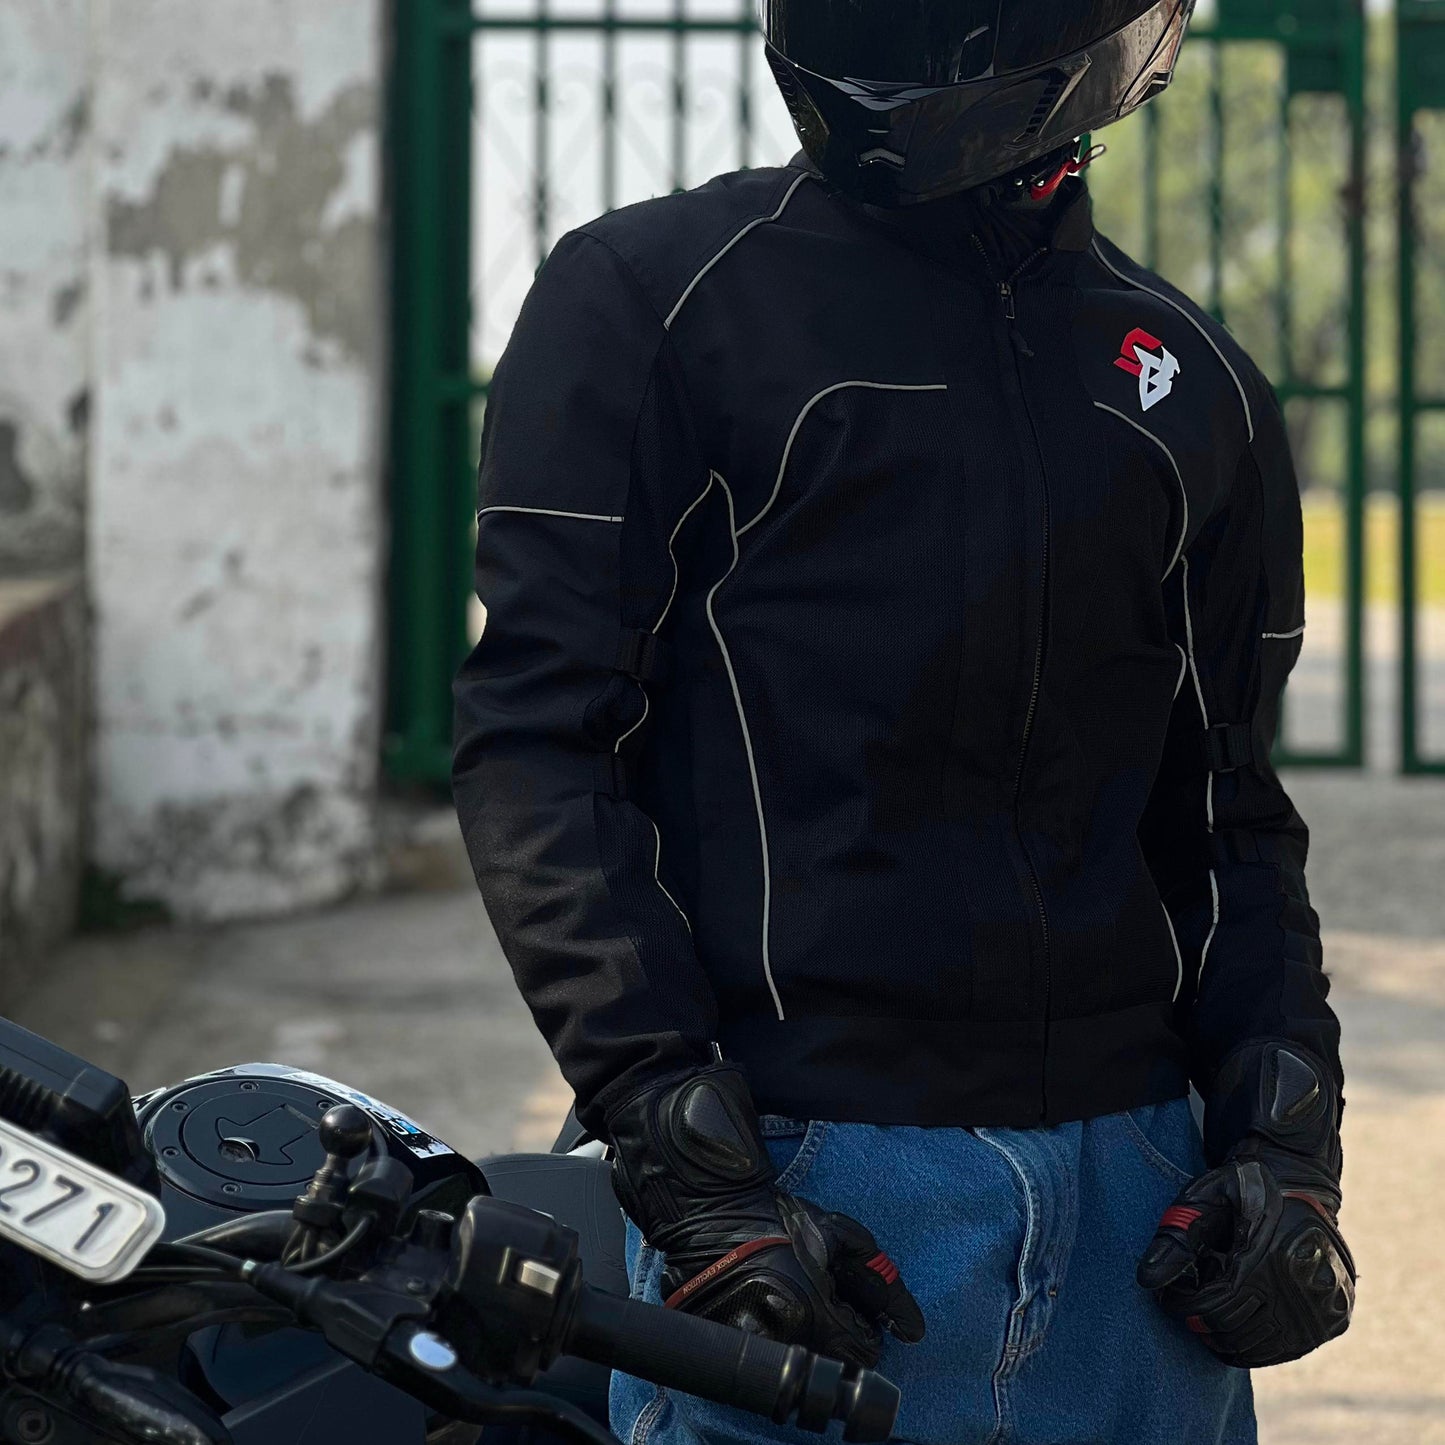 Steelbird Riding Jacket Zojila Z1 with Impact Protection Removable CE level 2 armour and Abrasion Resistance (Red)